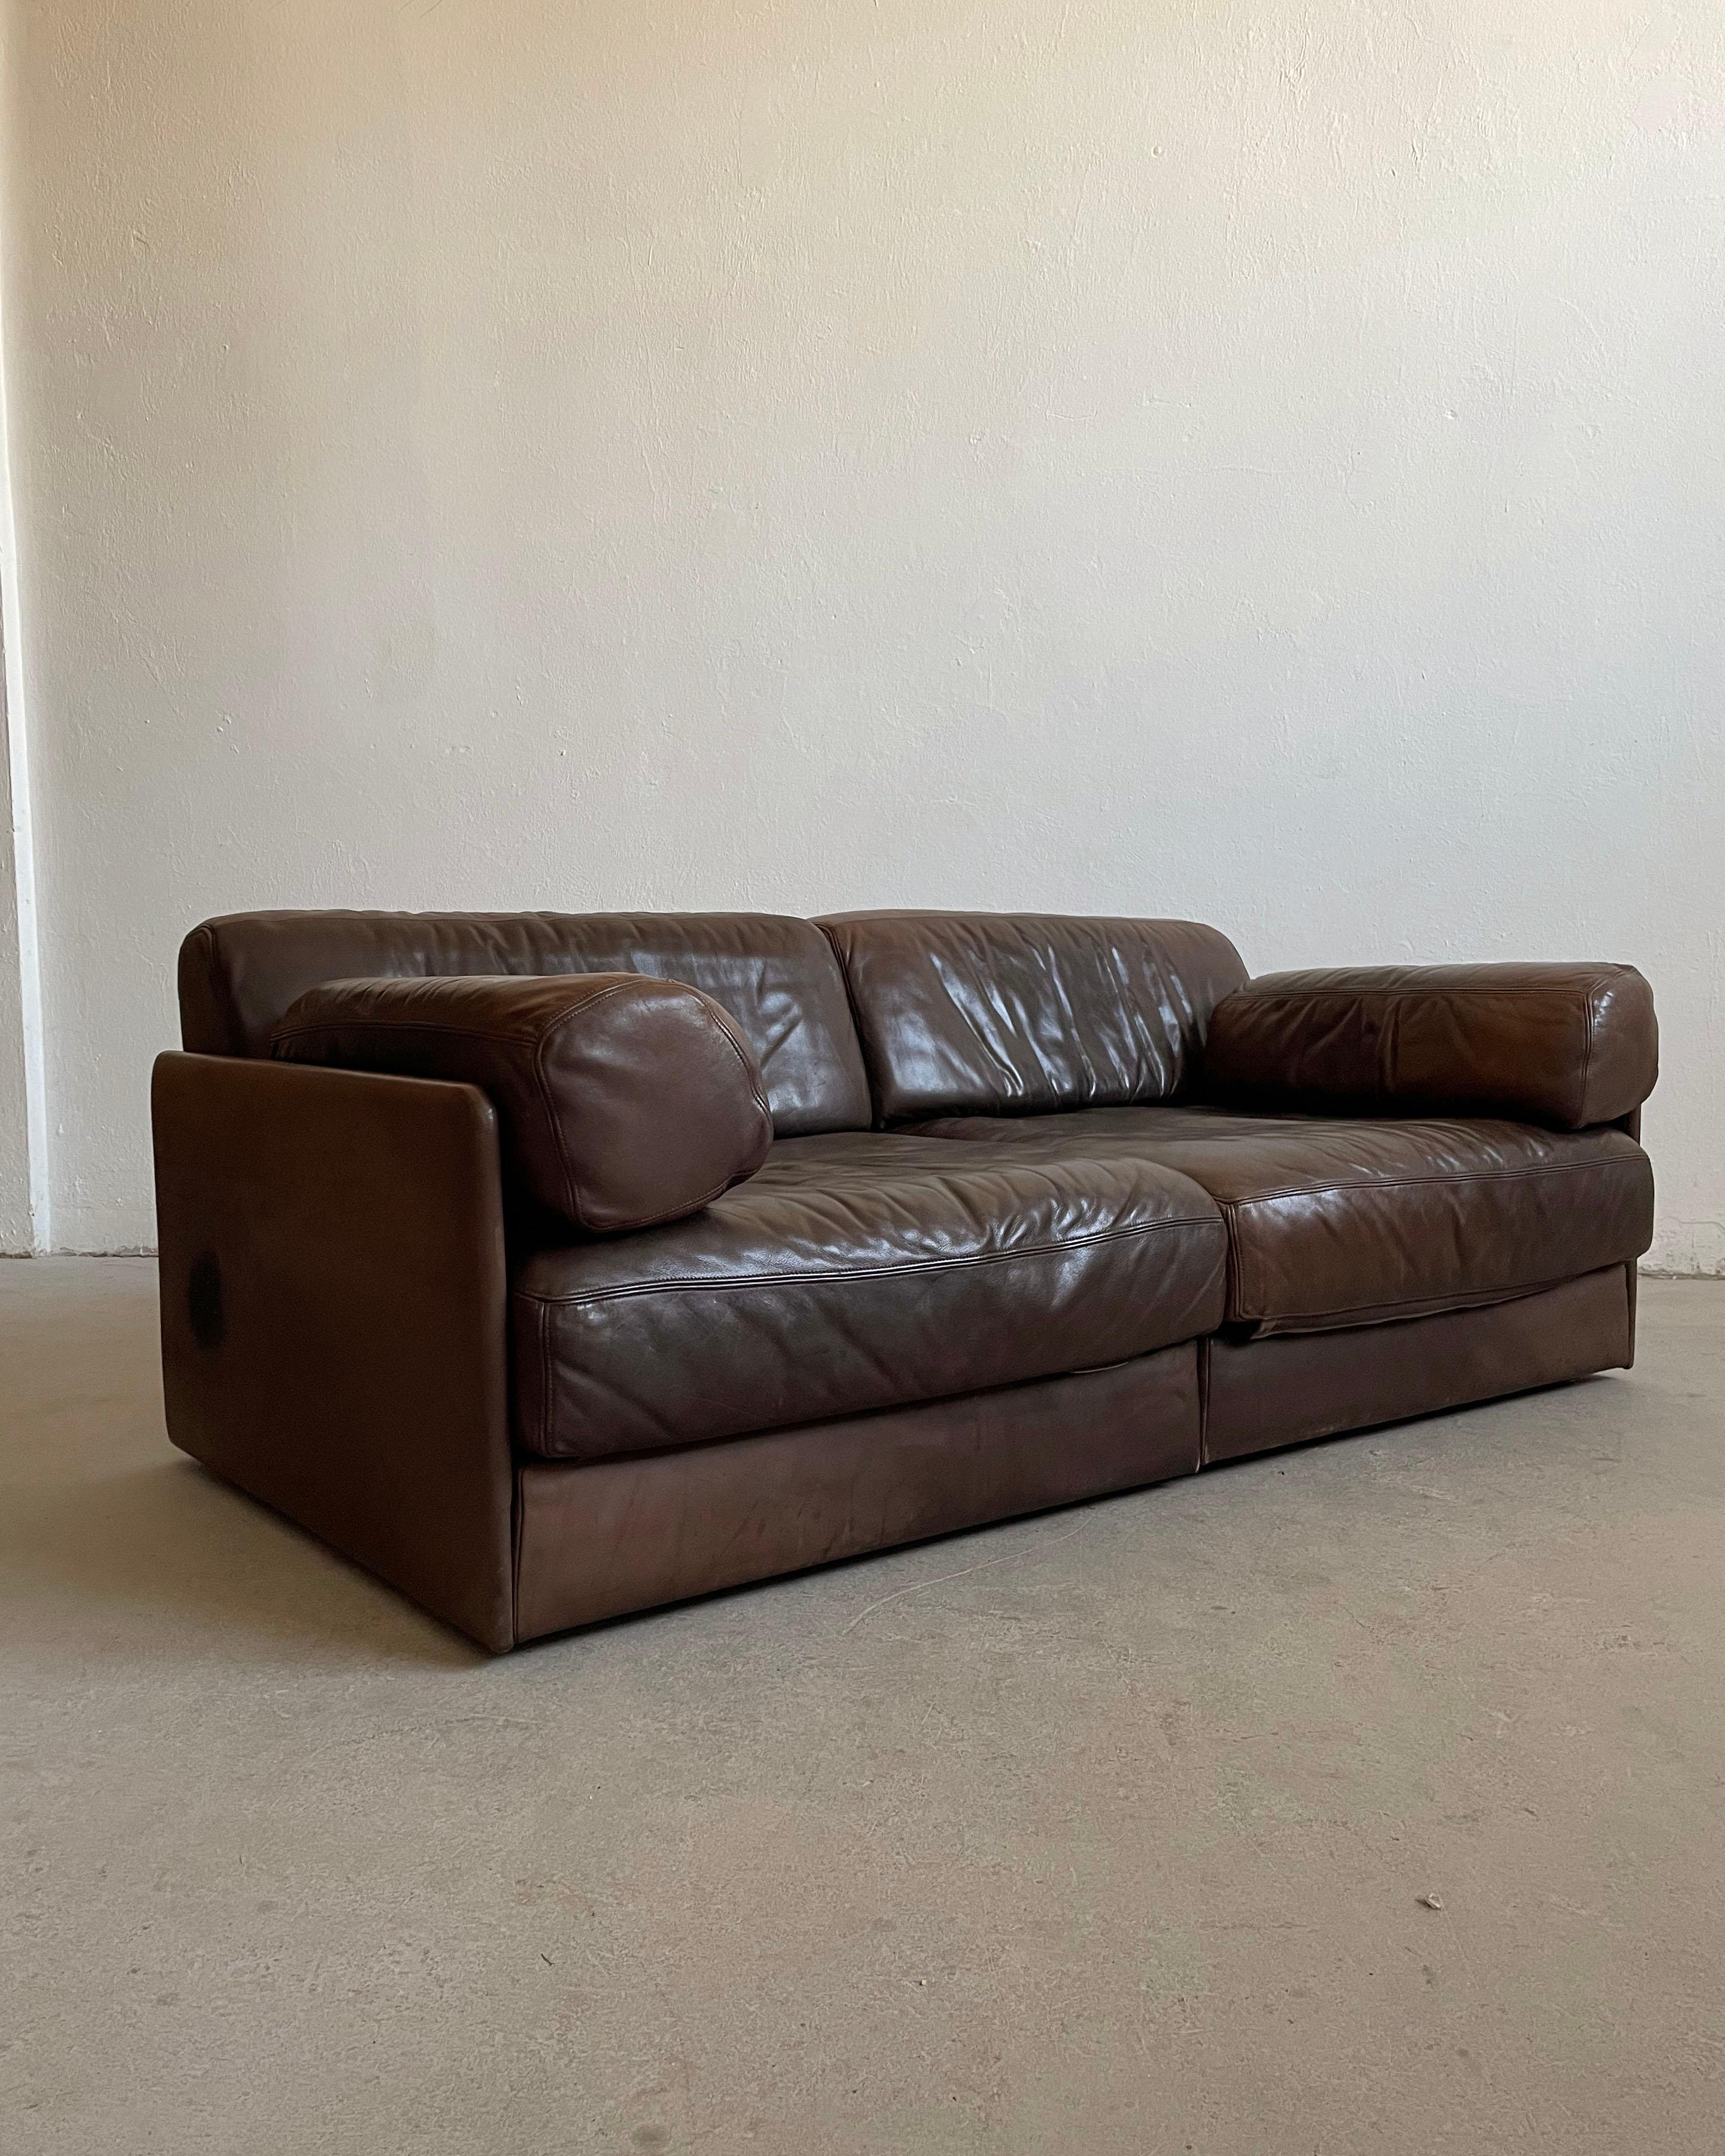 Mid-Century De Sede Ds 76 Modular Sofa Bed, 2-piece Brown Leather Modules, 1970s In Good Condition For Sale In Zagreb, HR